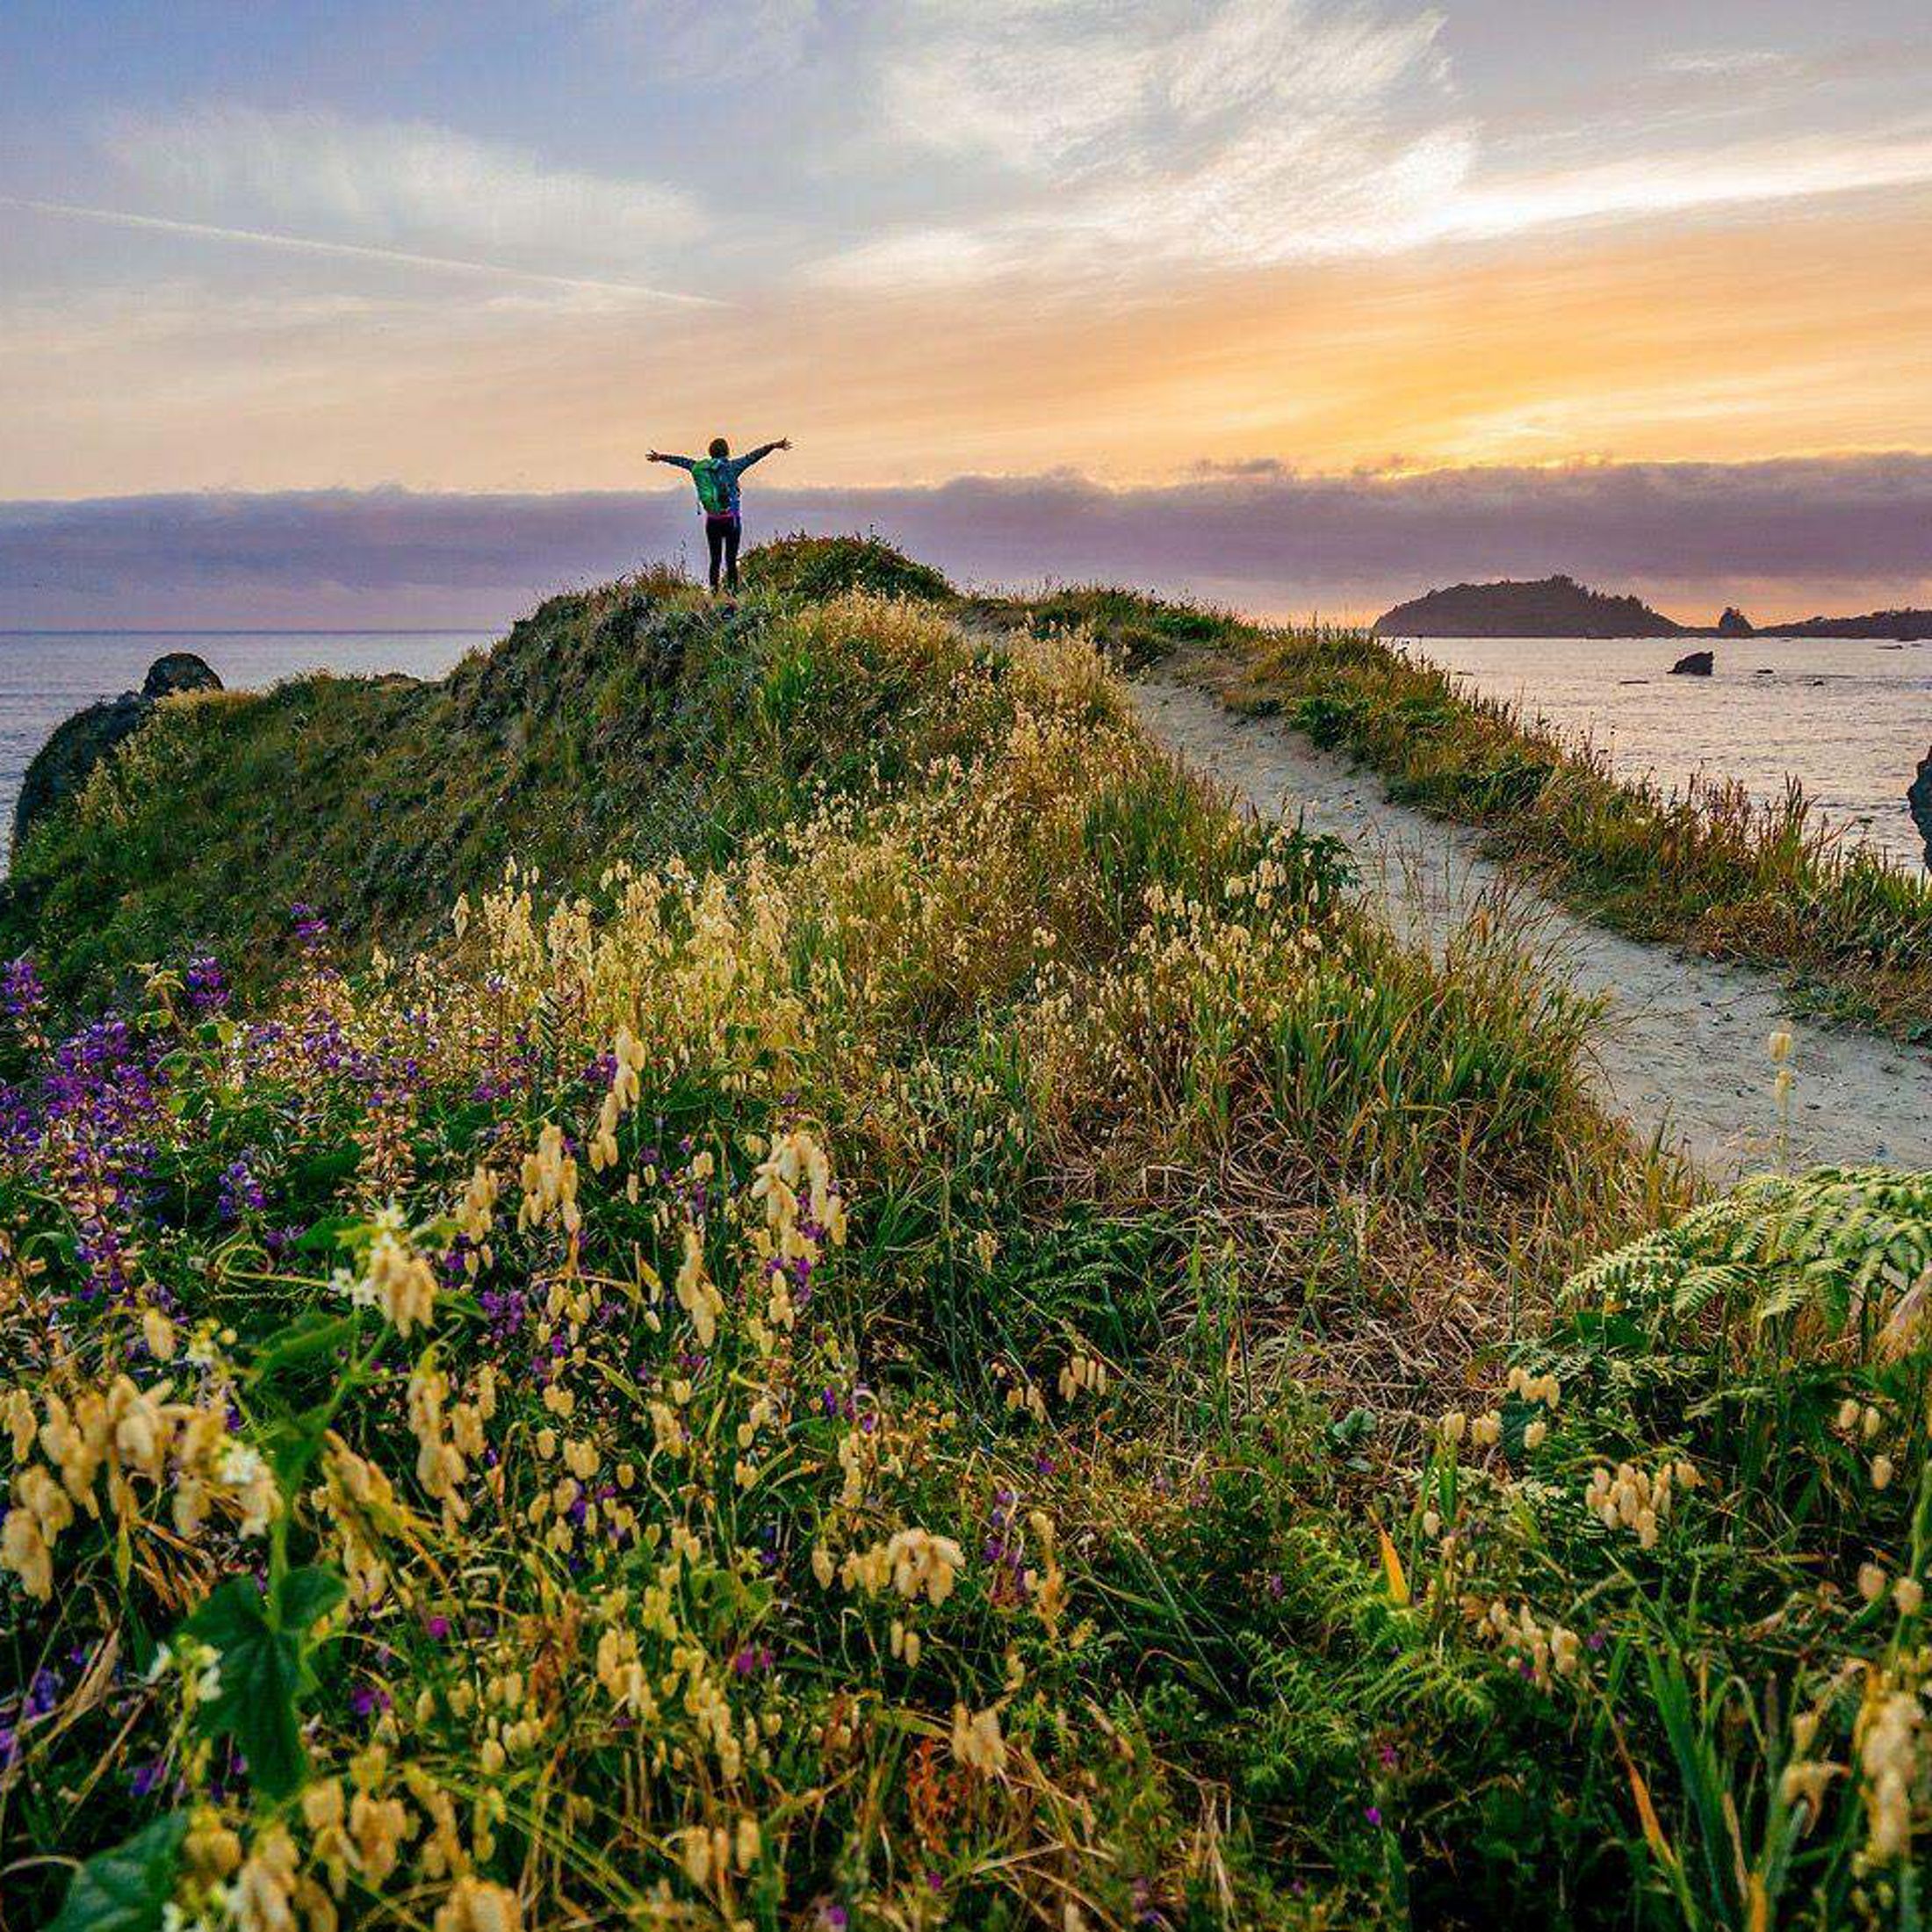 A person stands with arms outstretched in the distance along a narrow trail lined with colorful flowers and ocean in the background.